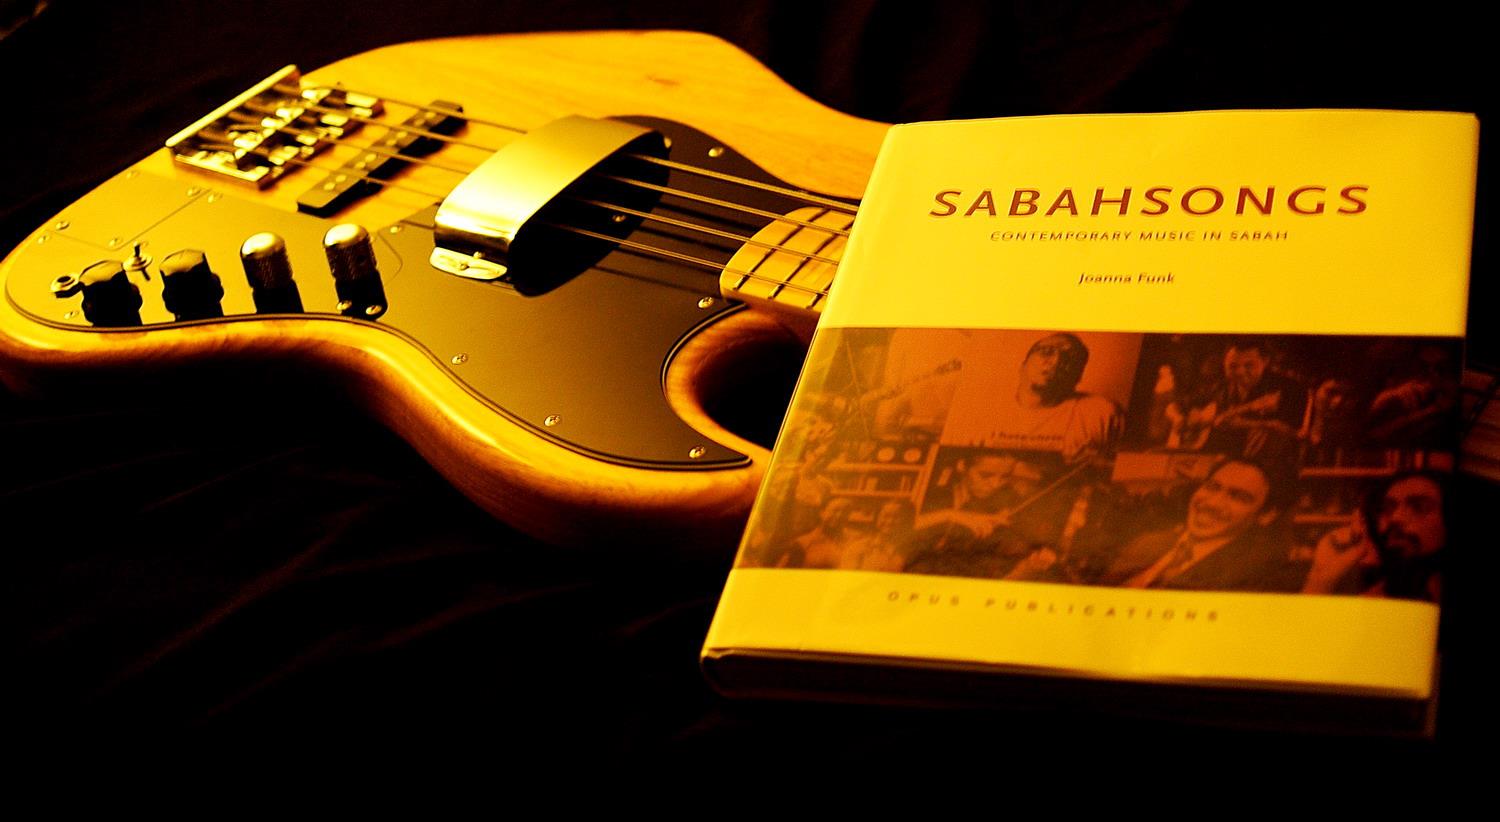 A gallery of the SabahSongs book